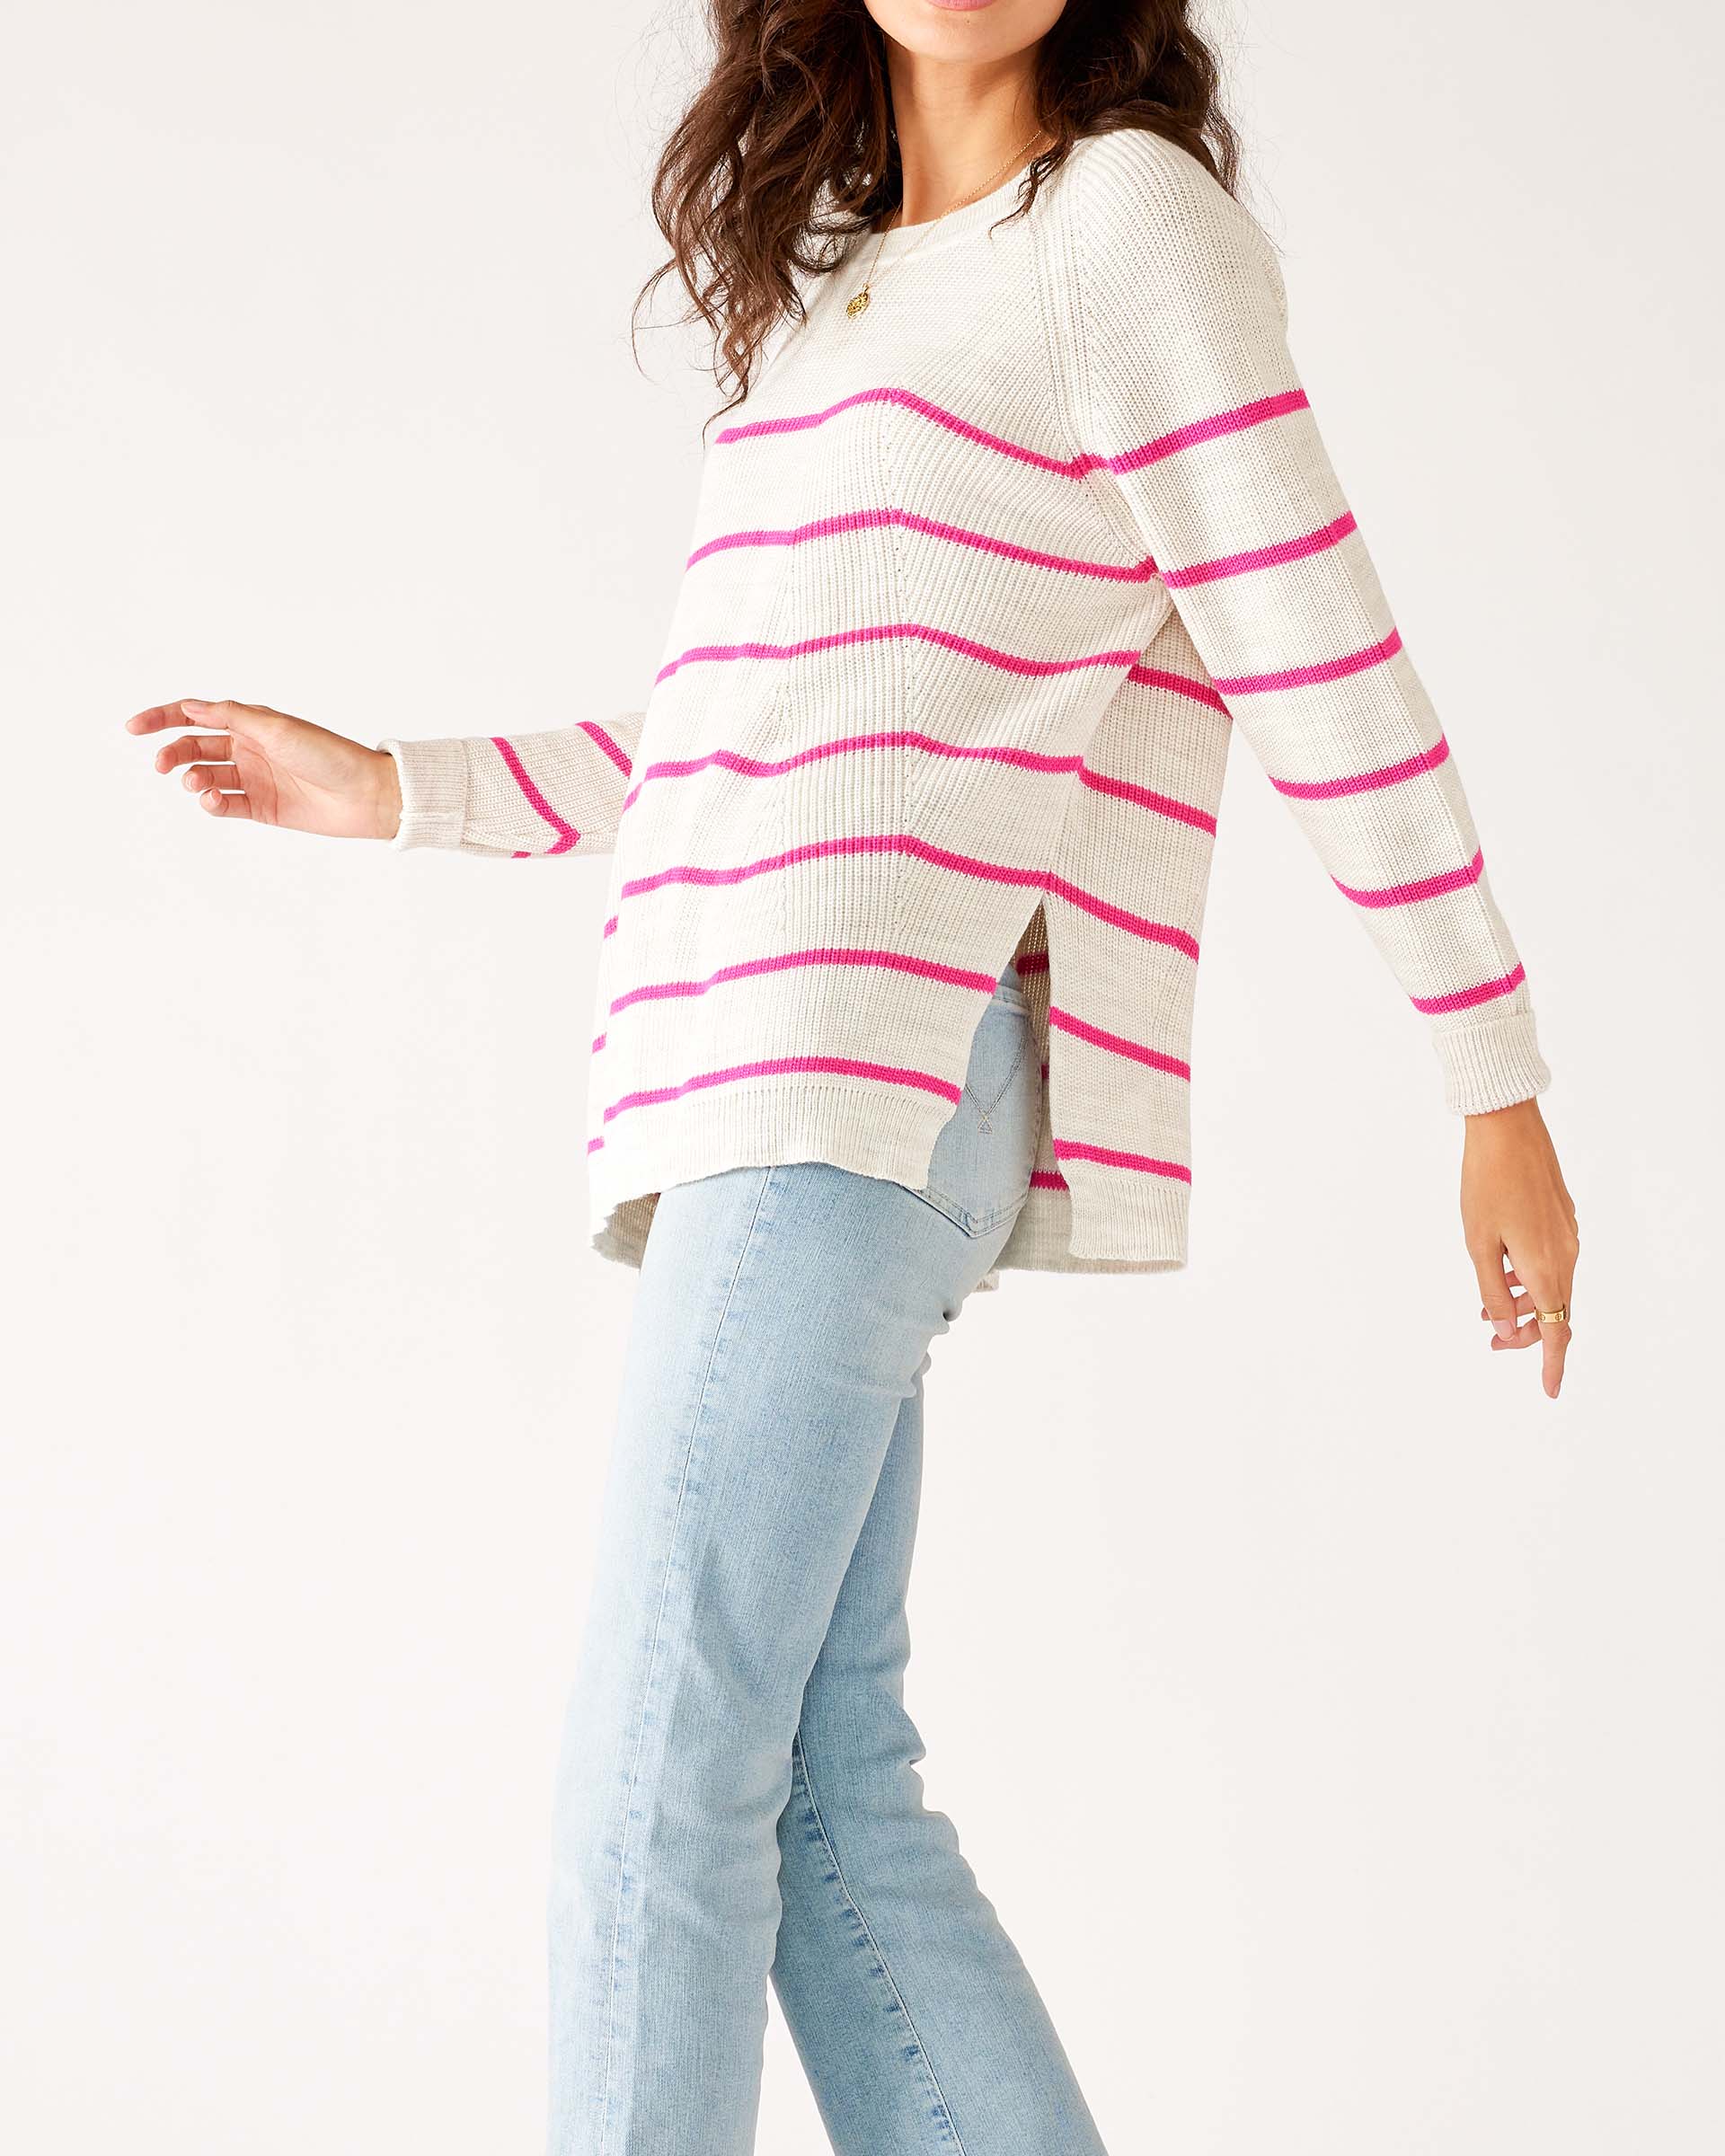 Womens White and Pink Striped Midweight Sweater Side View Walking